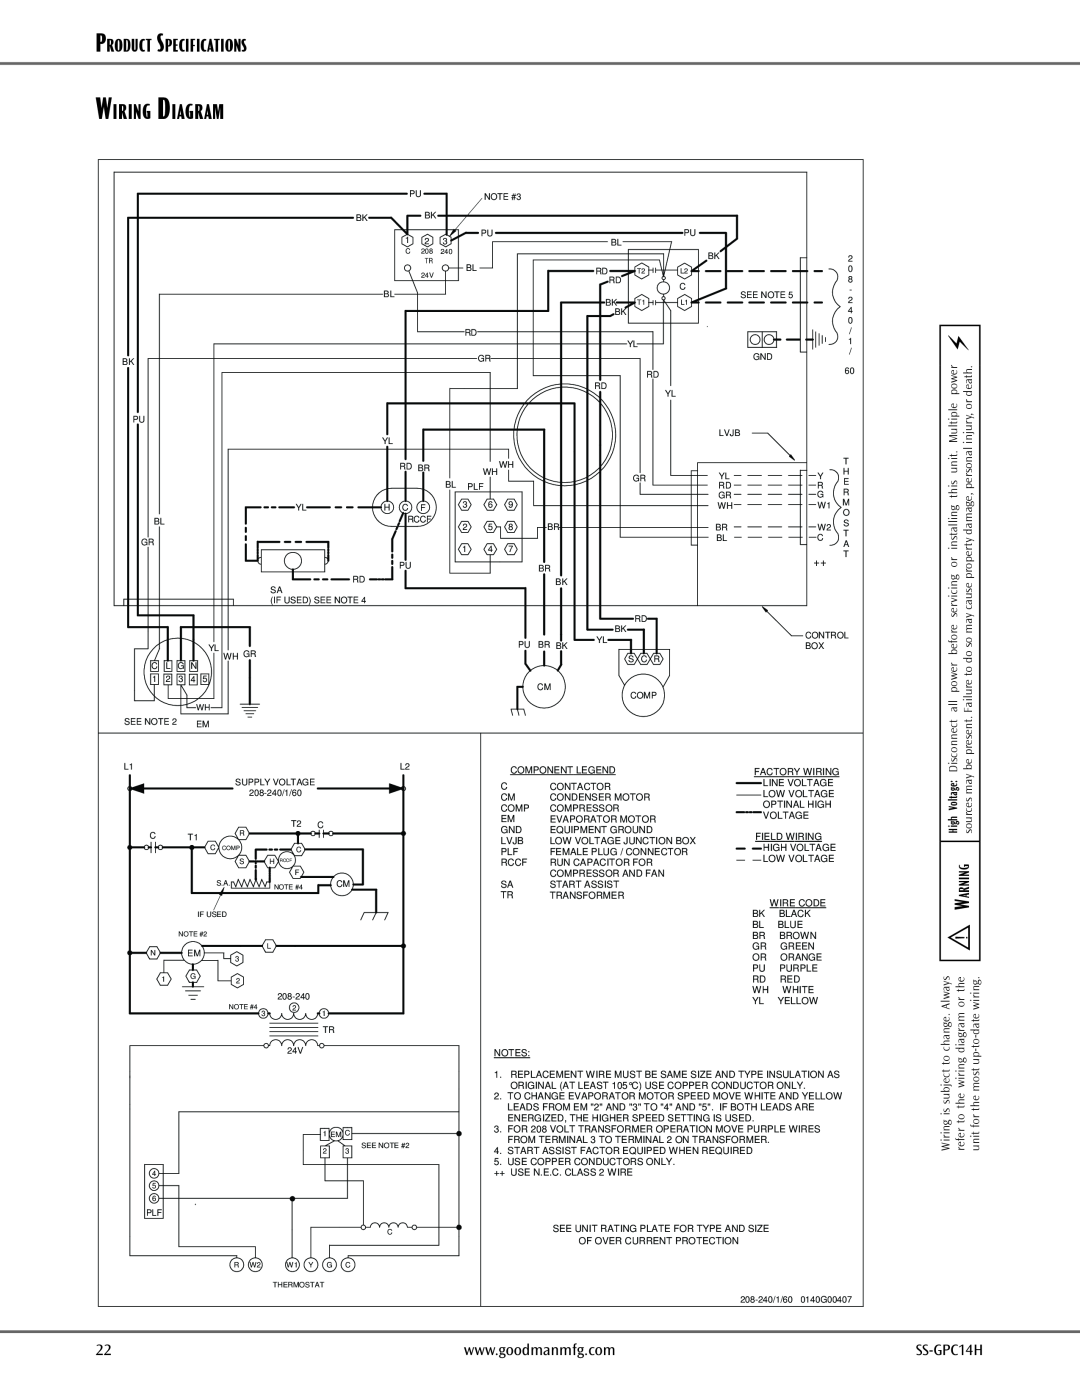 Goodman Mfg Wiring Diagram, Product Specifications, death.power, Multiple, injury, or, SS-GPC14H, Disconnect, present 